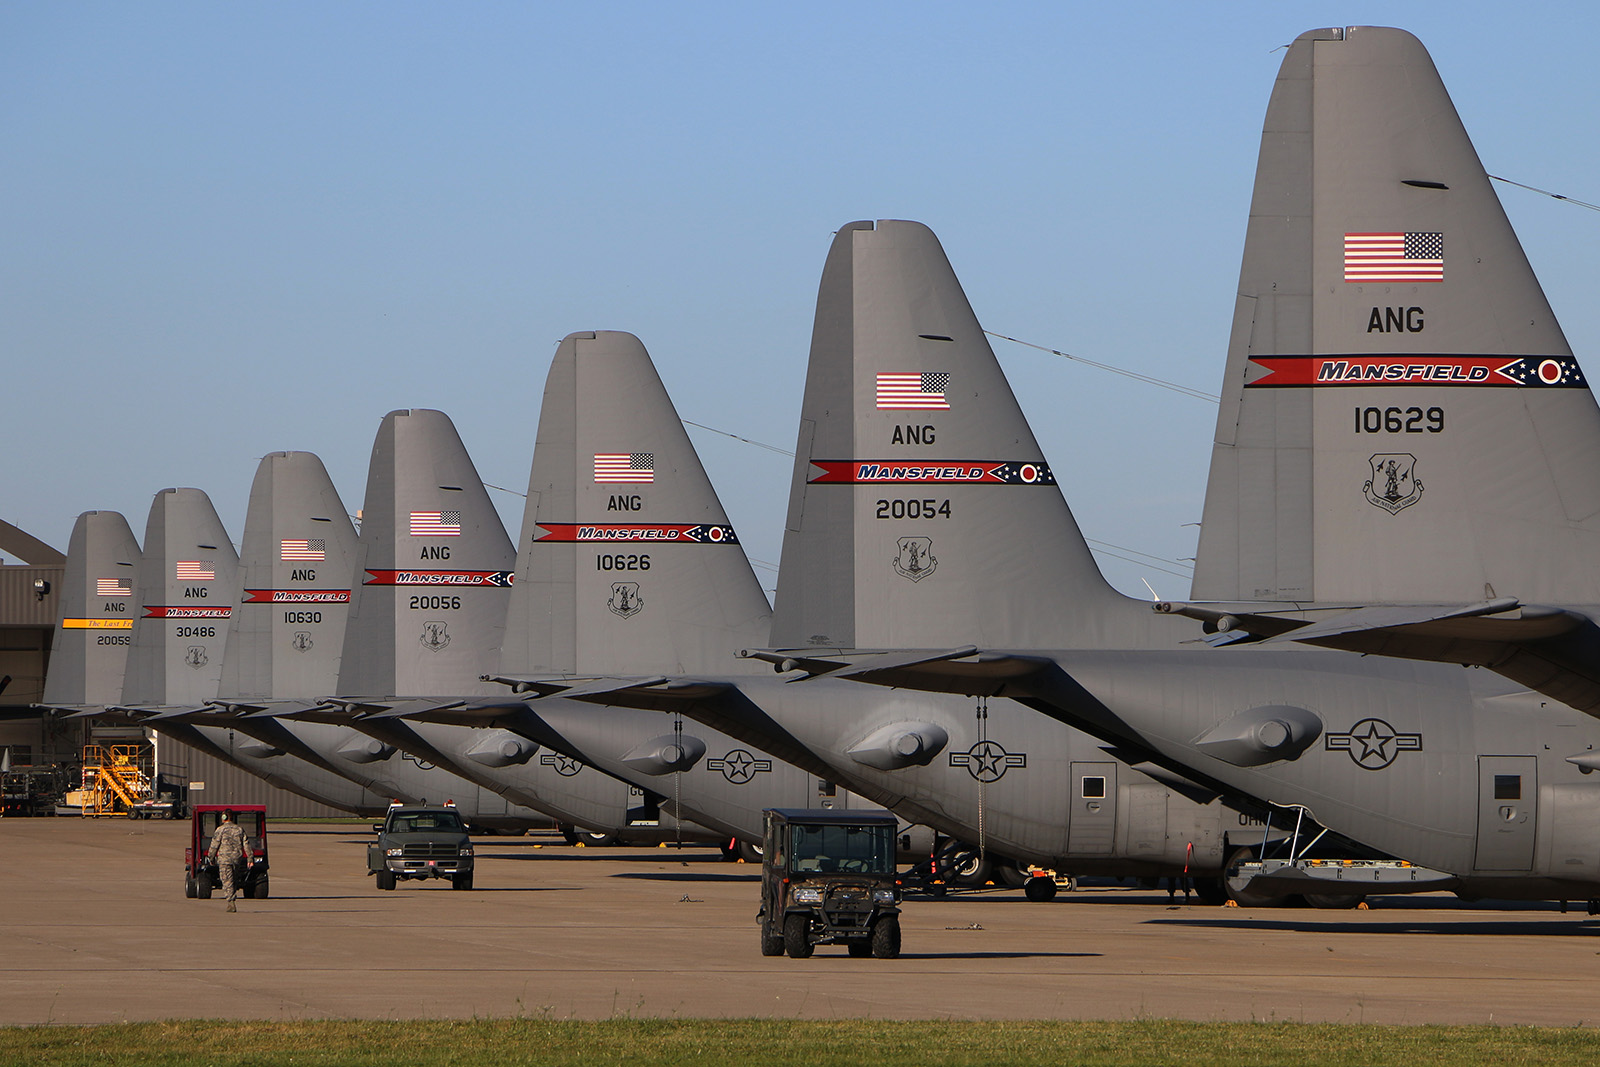 179th Air Wing C-130s in Mansfield, Ohio. At least one of these magnificent beasts will be on display at Port Clinton. (photo Tech. Sgt. Joe Harwood via 172nd AW)